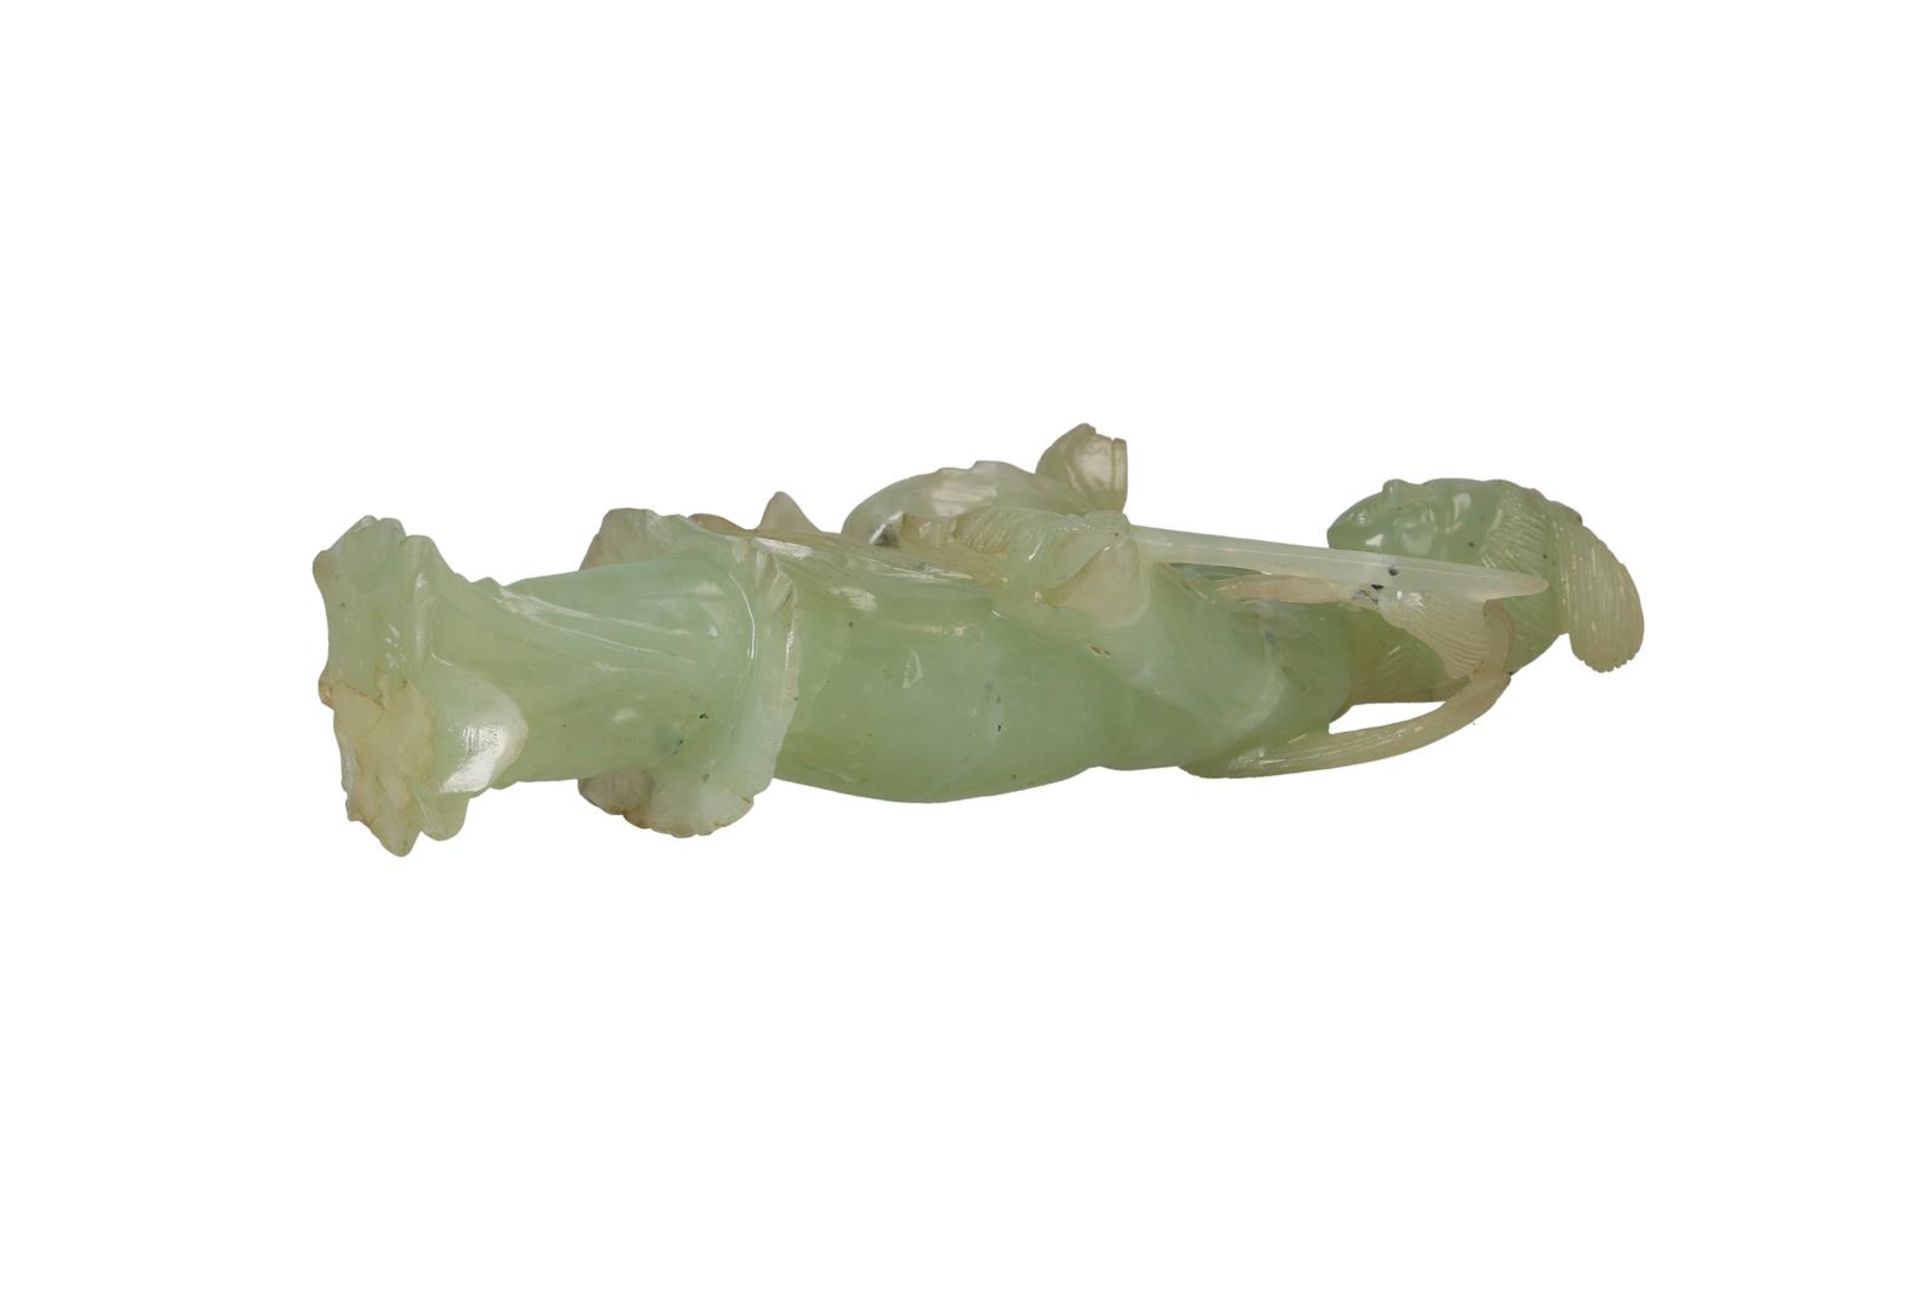 A carved jade sculpture of a woman holding valuables. China, 20th century. H. 15.5 cm. Condition - Image 4 of 4